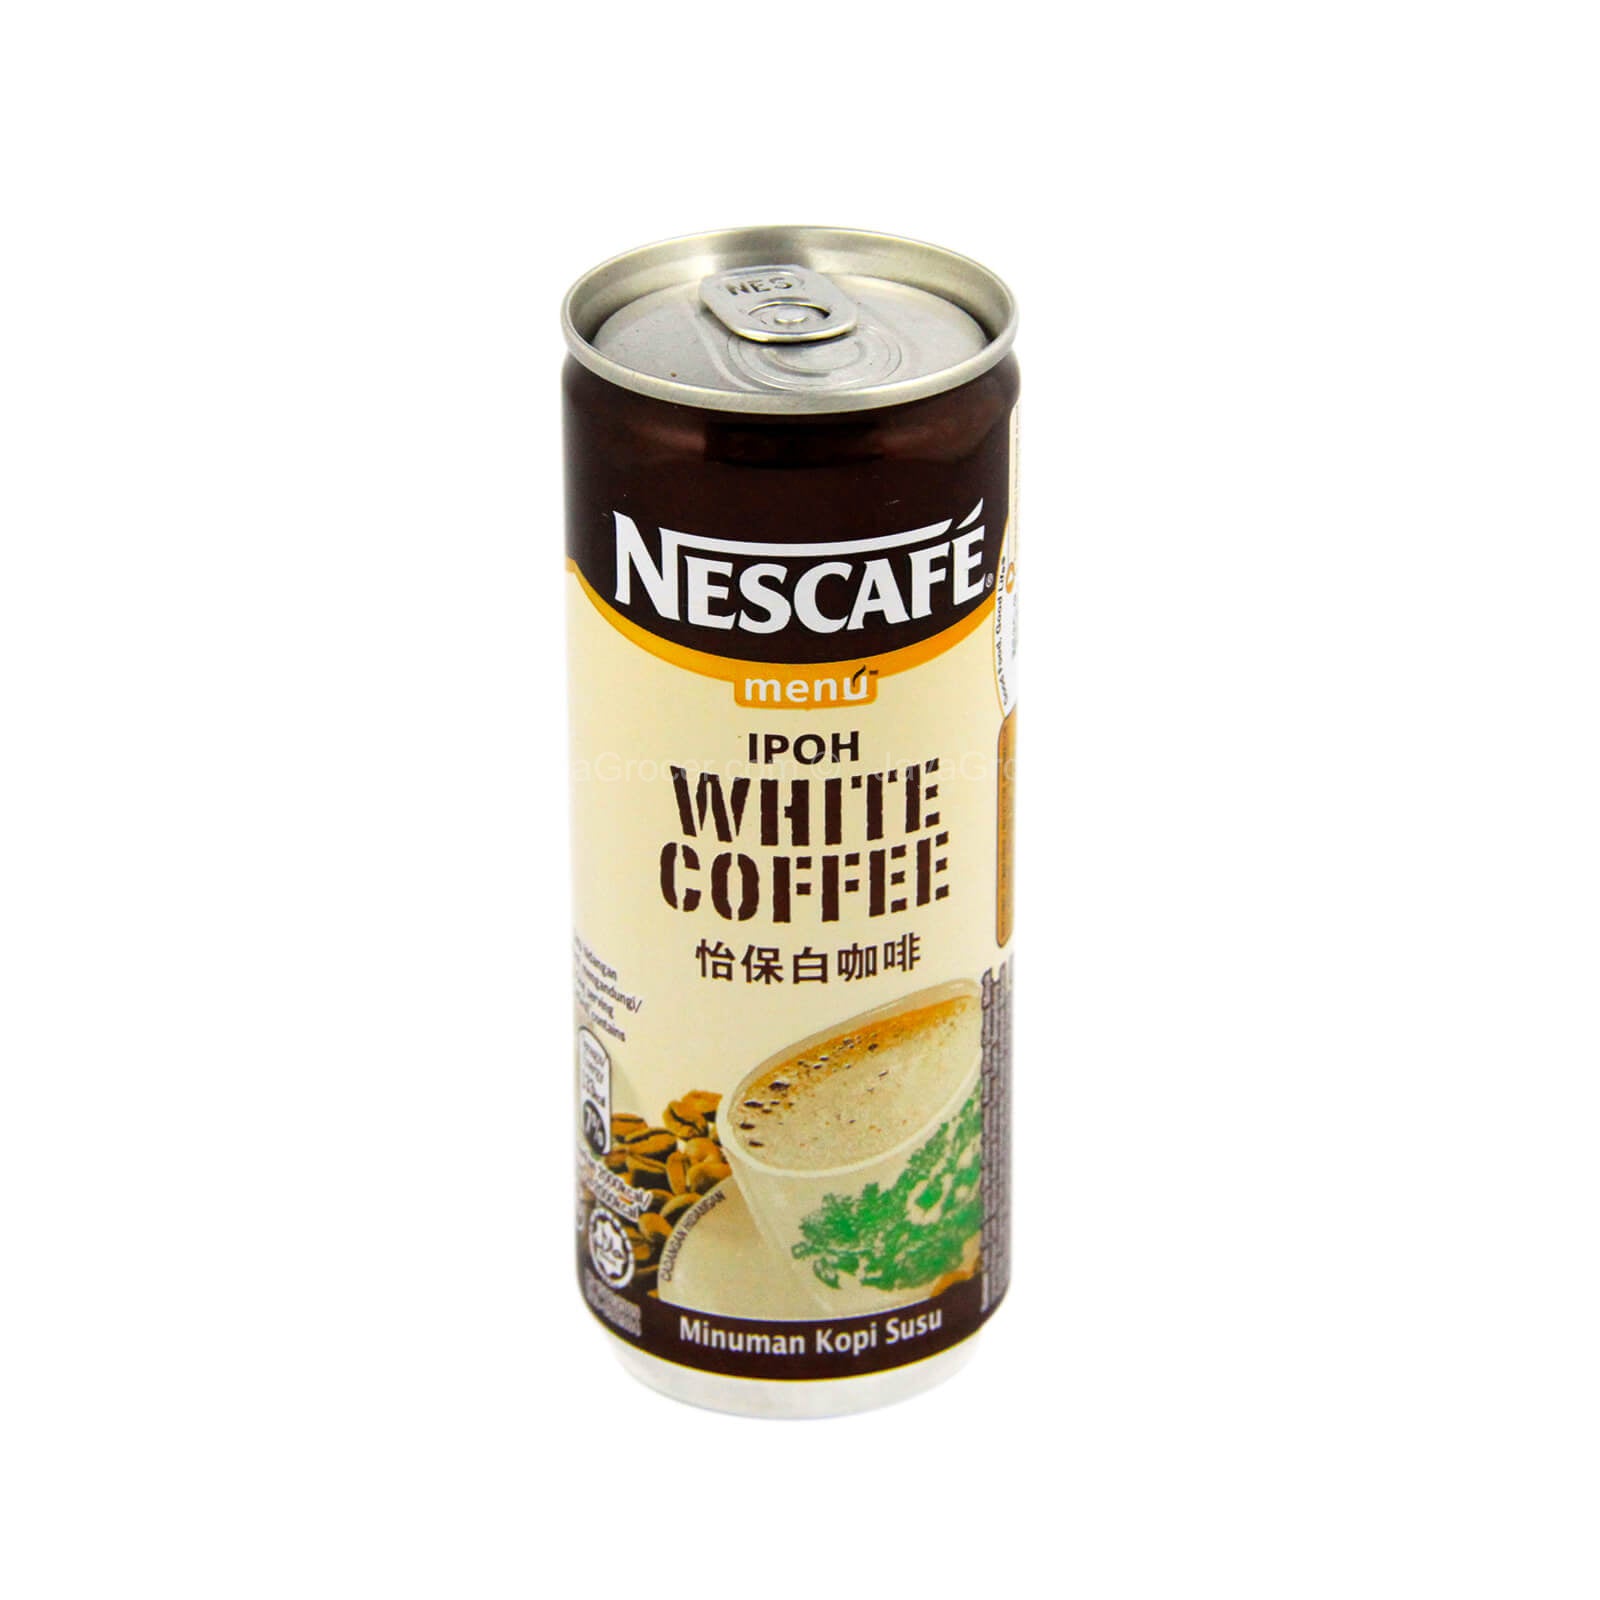 Chekhup 3in1 Ipoh White Coffee Rich Cup 40g (unit)